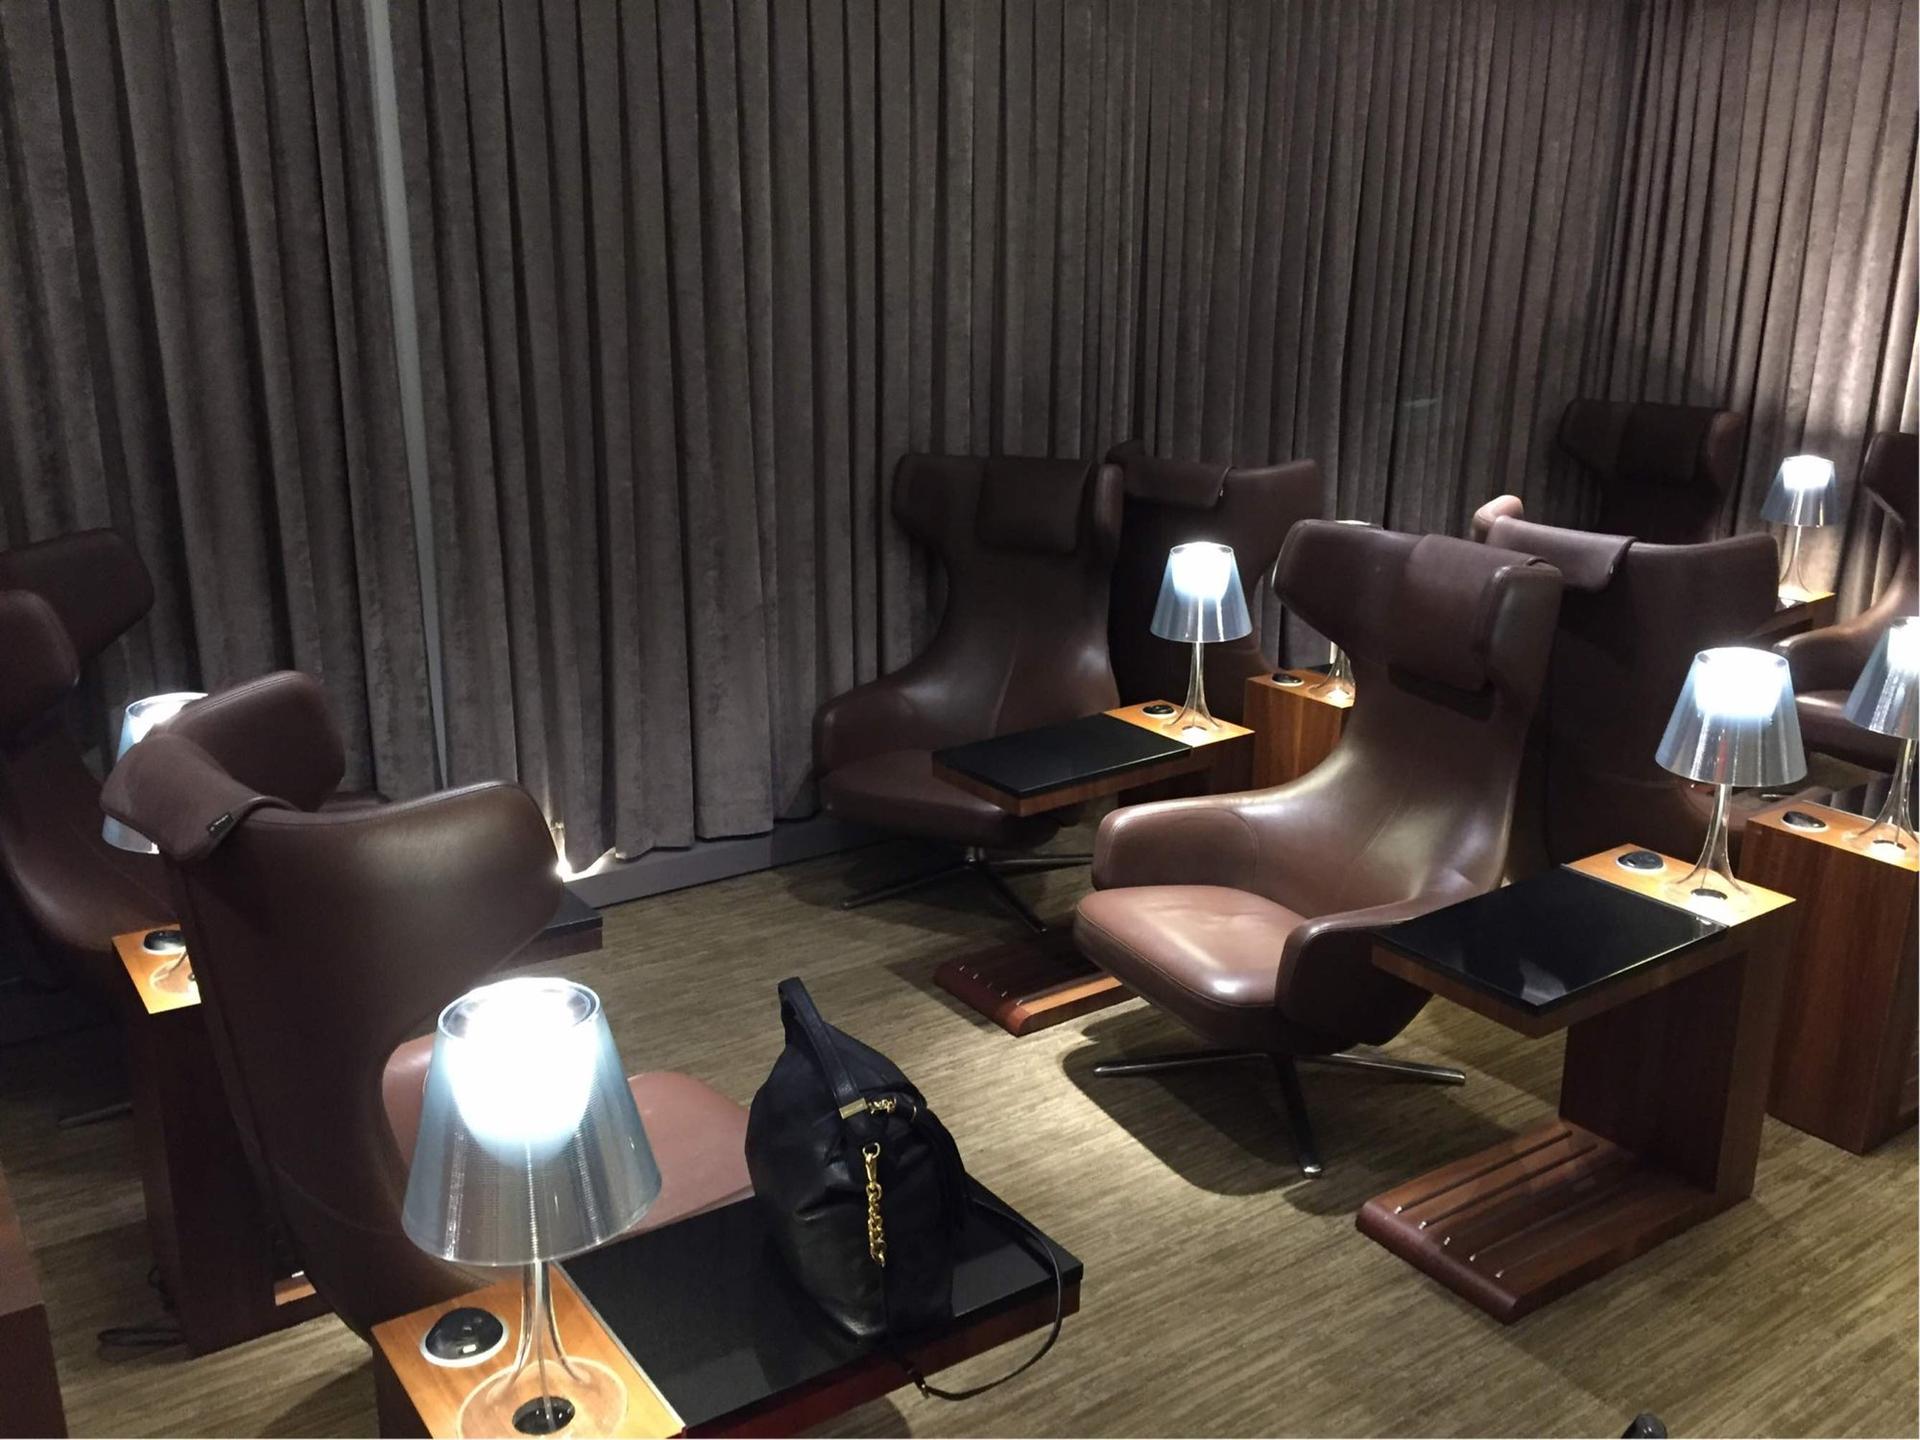 Singapore Airlines SilverKris First Class Lounge image 7 of 7